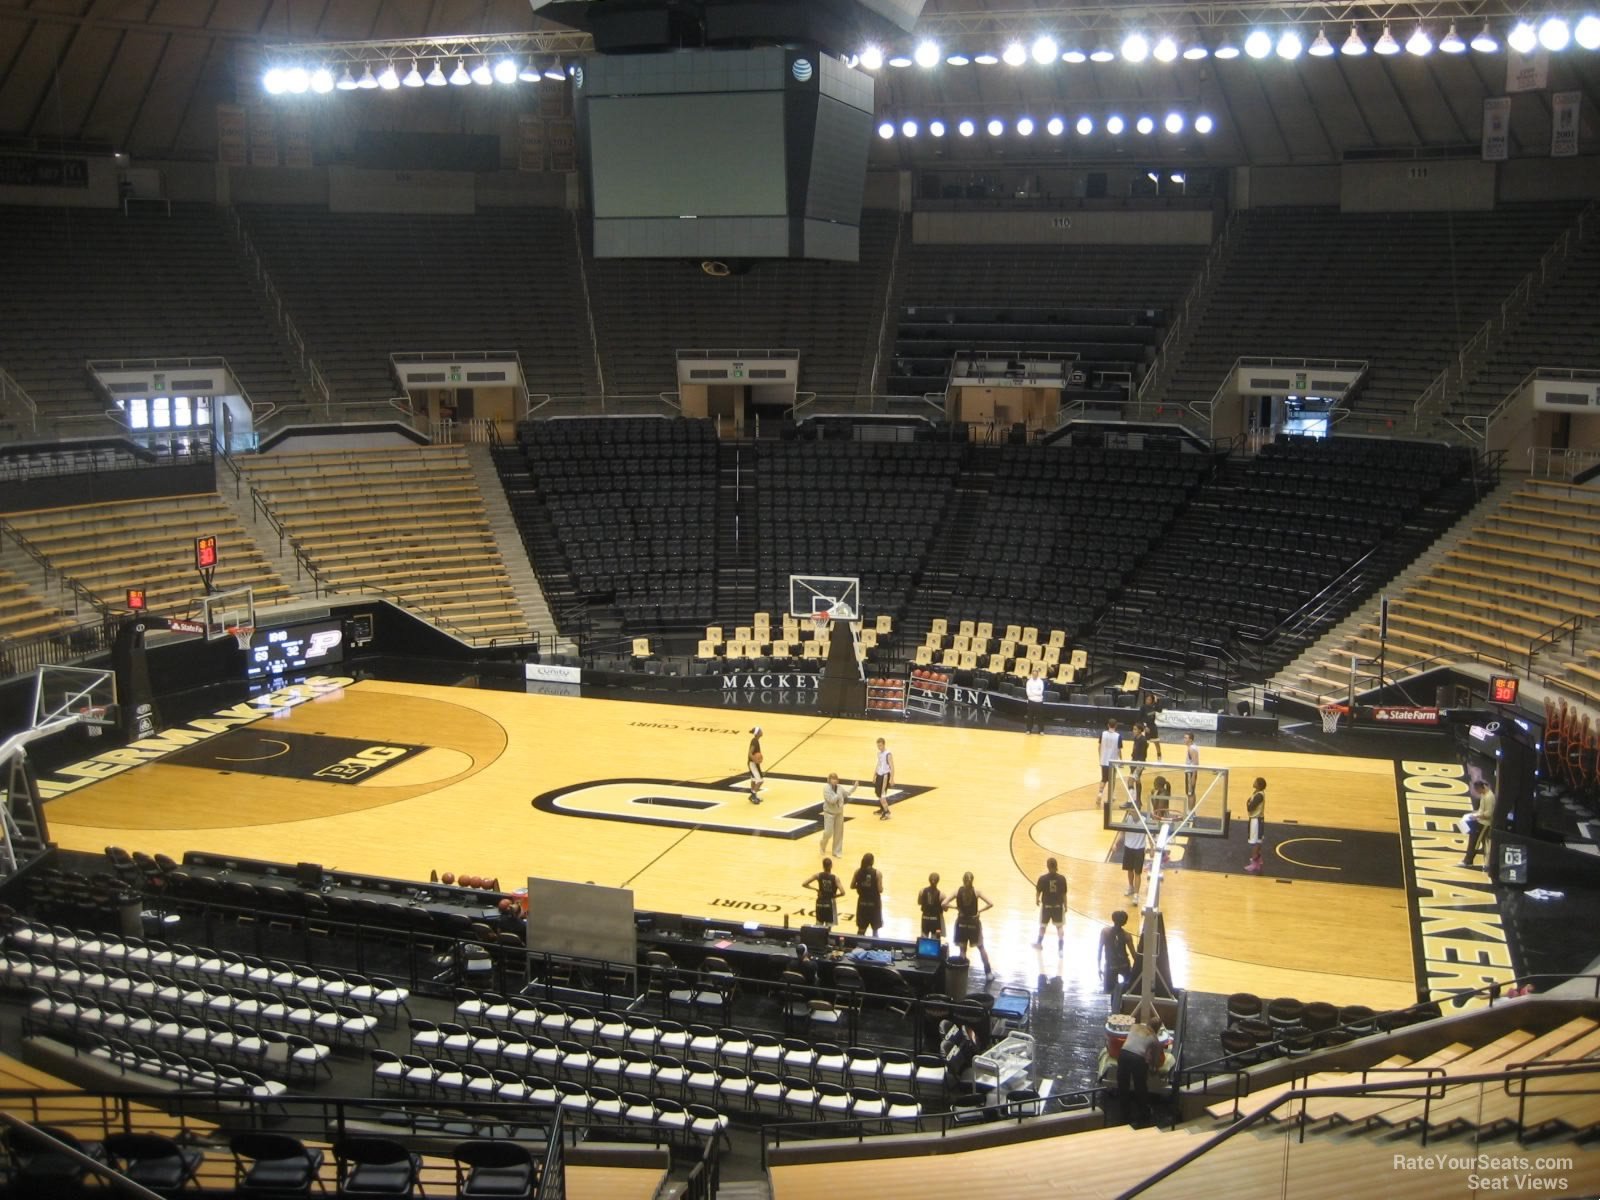 section 101, row 10 seat view  - mackey arena